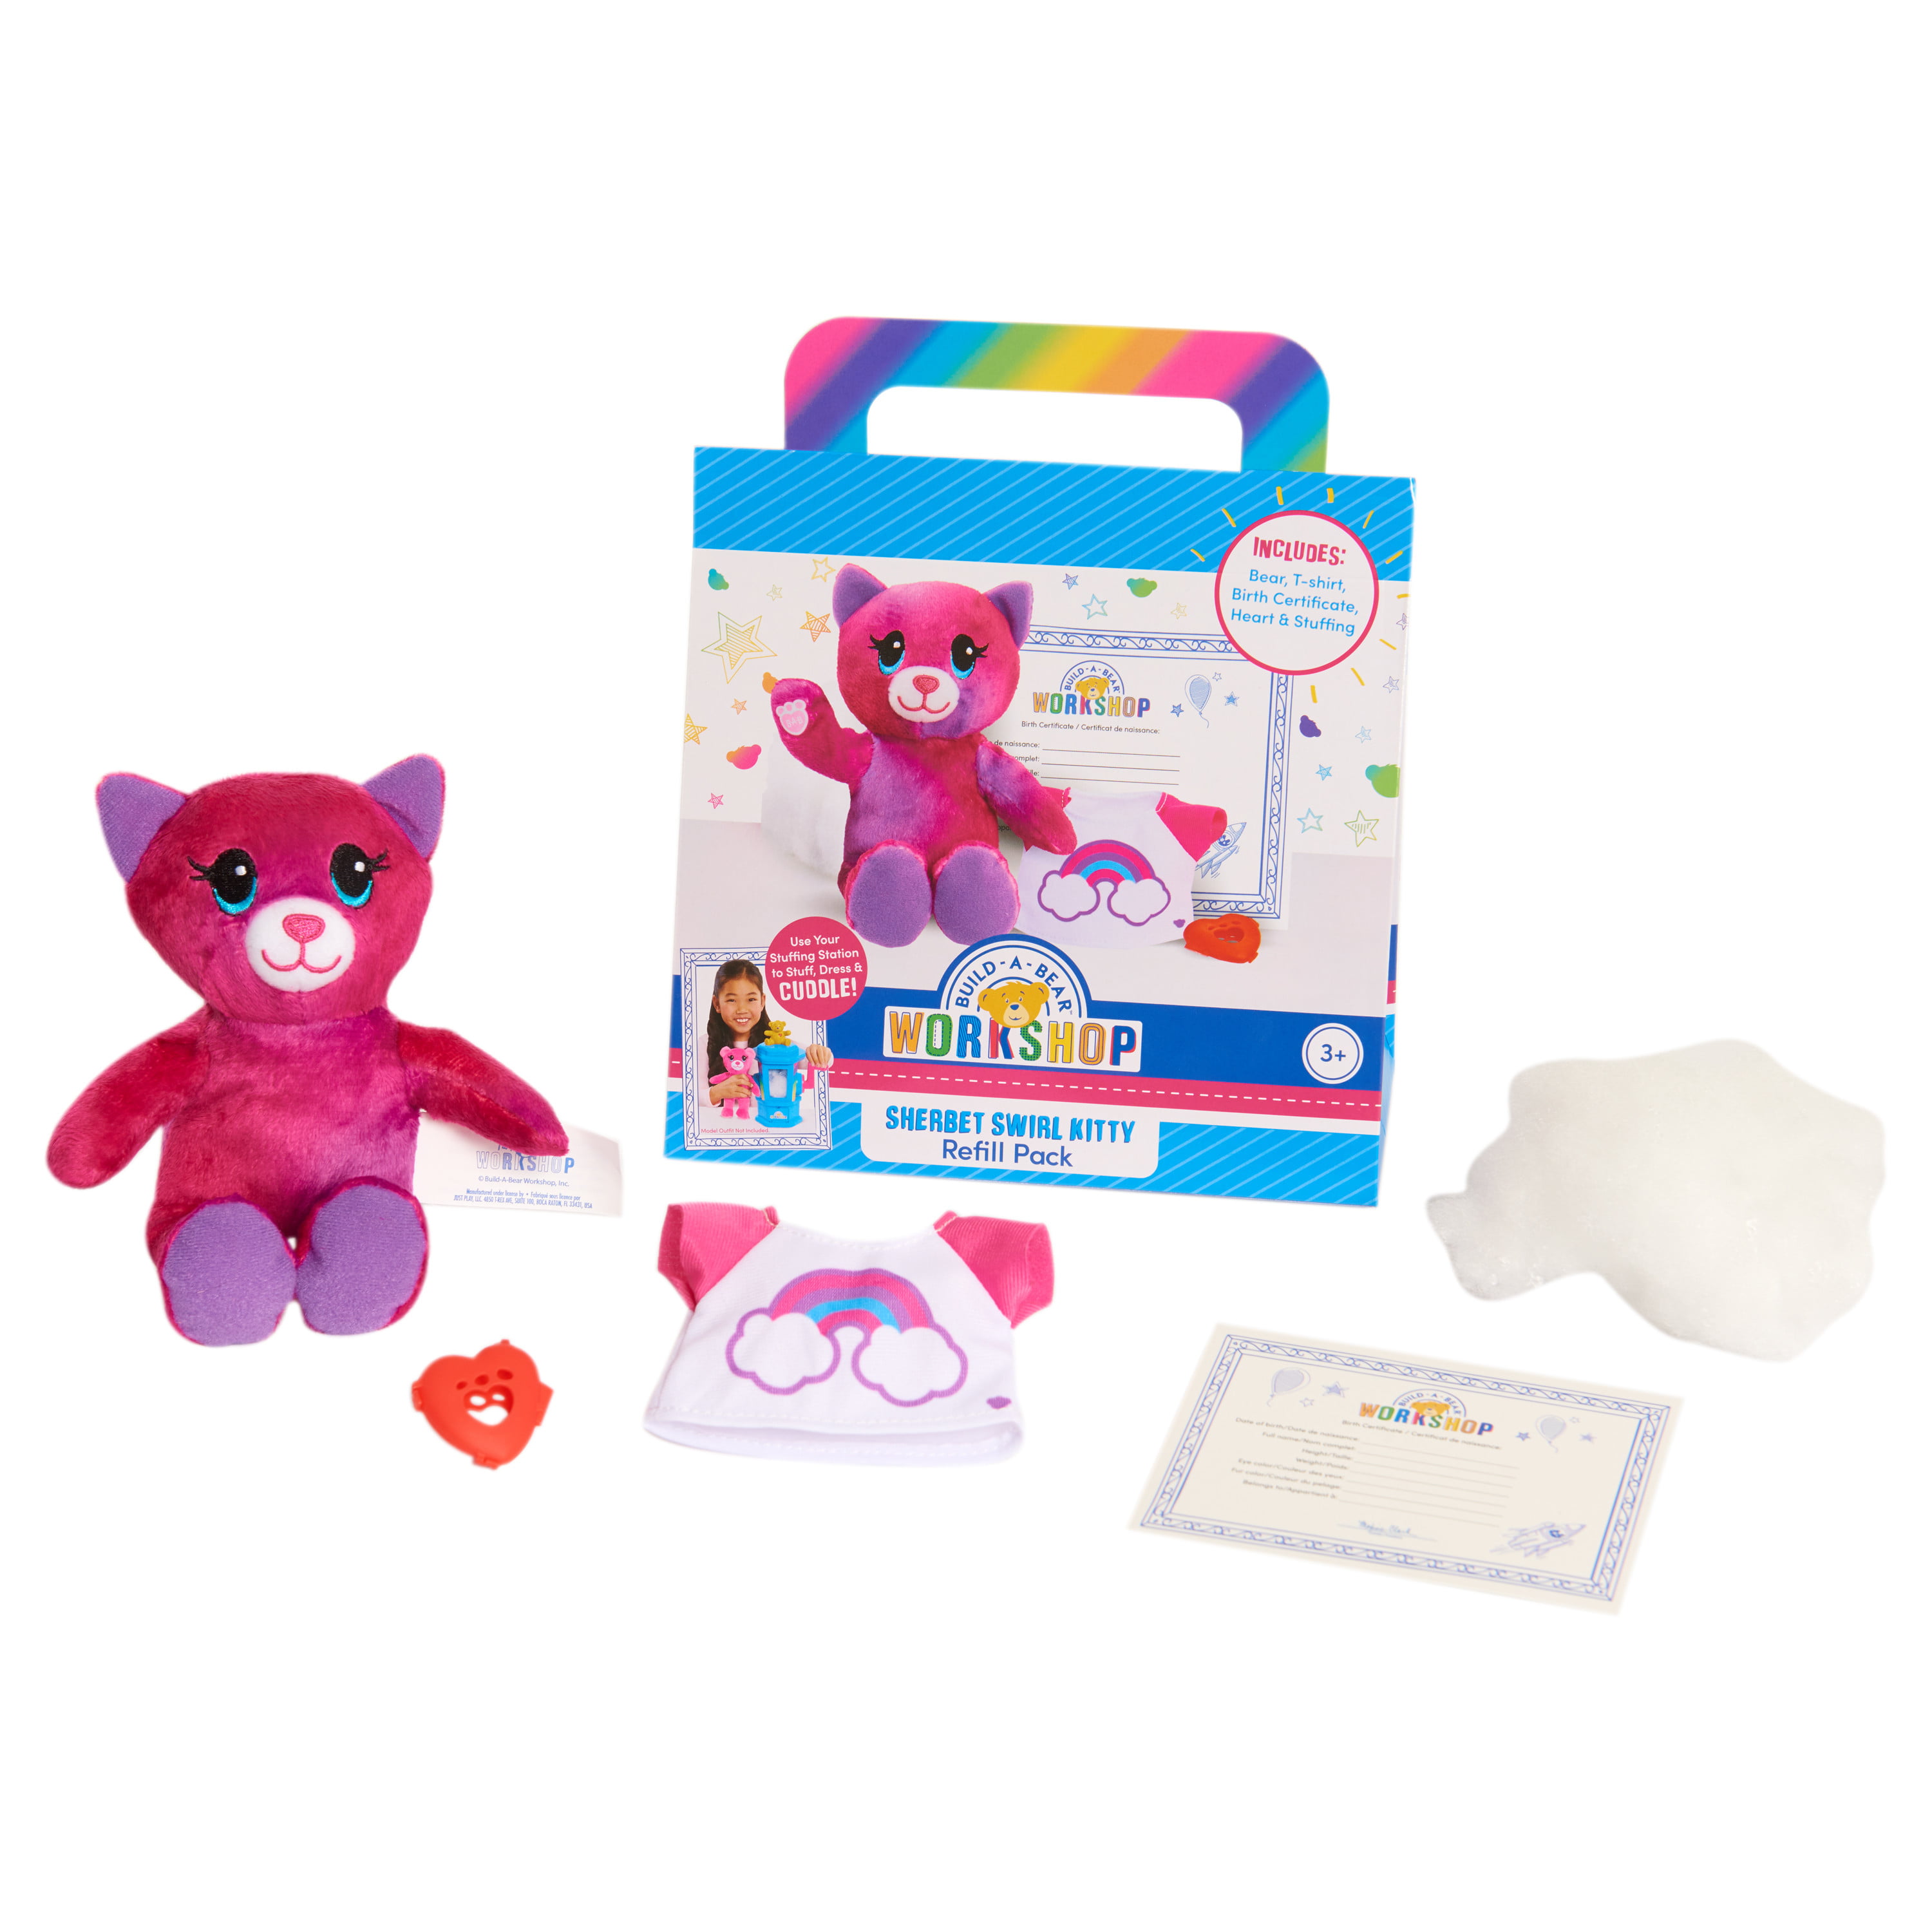 Build A Bear 3D Pink Swirly Kitty Girl Shoes